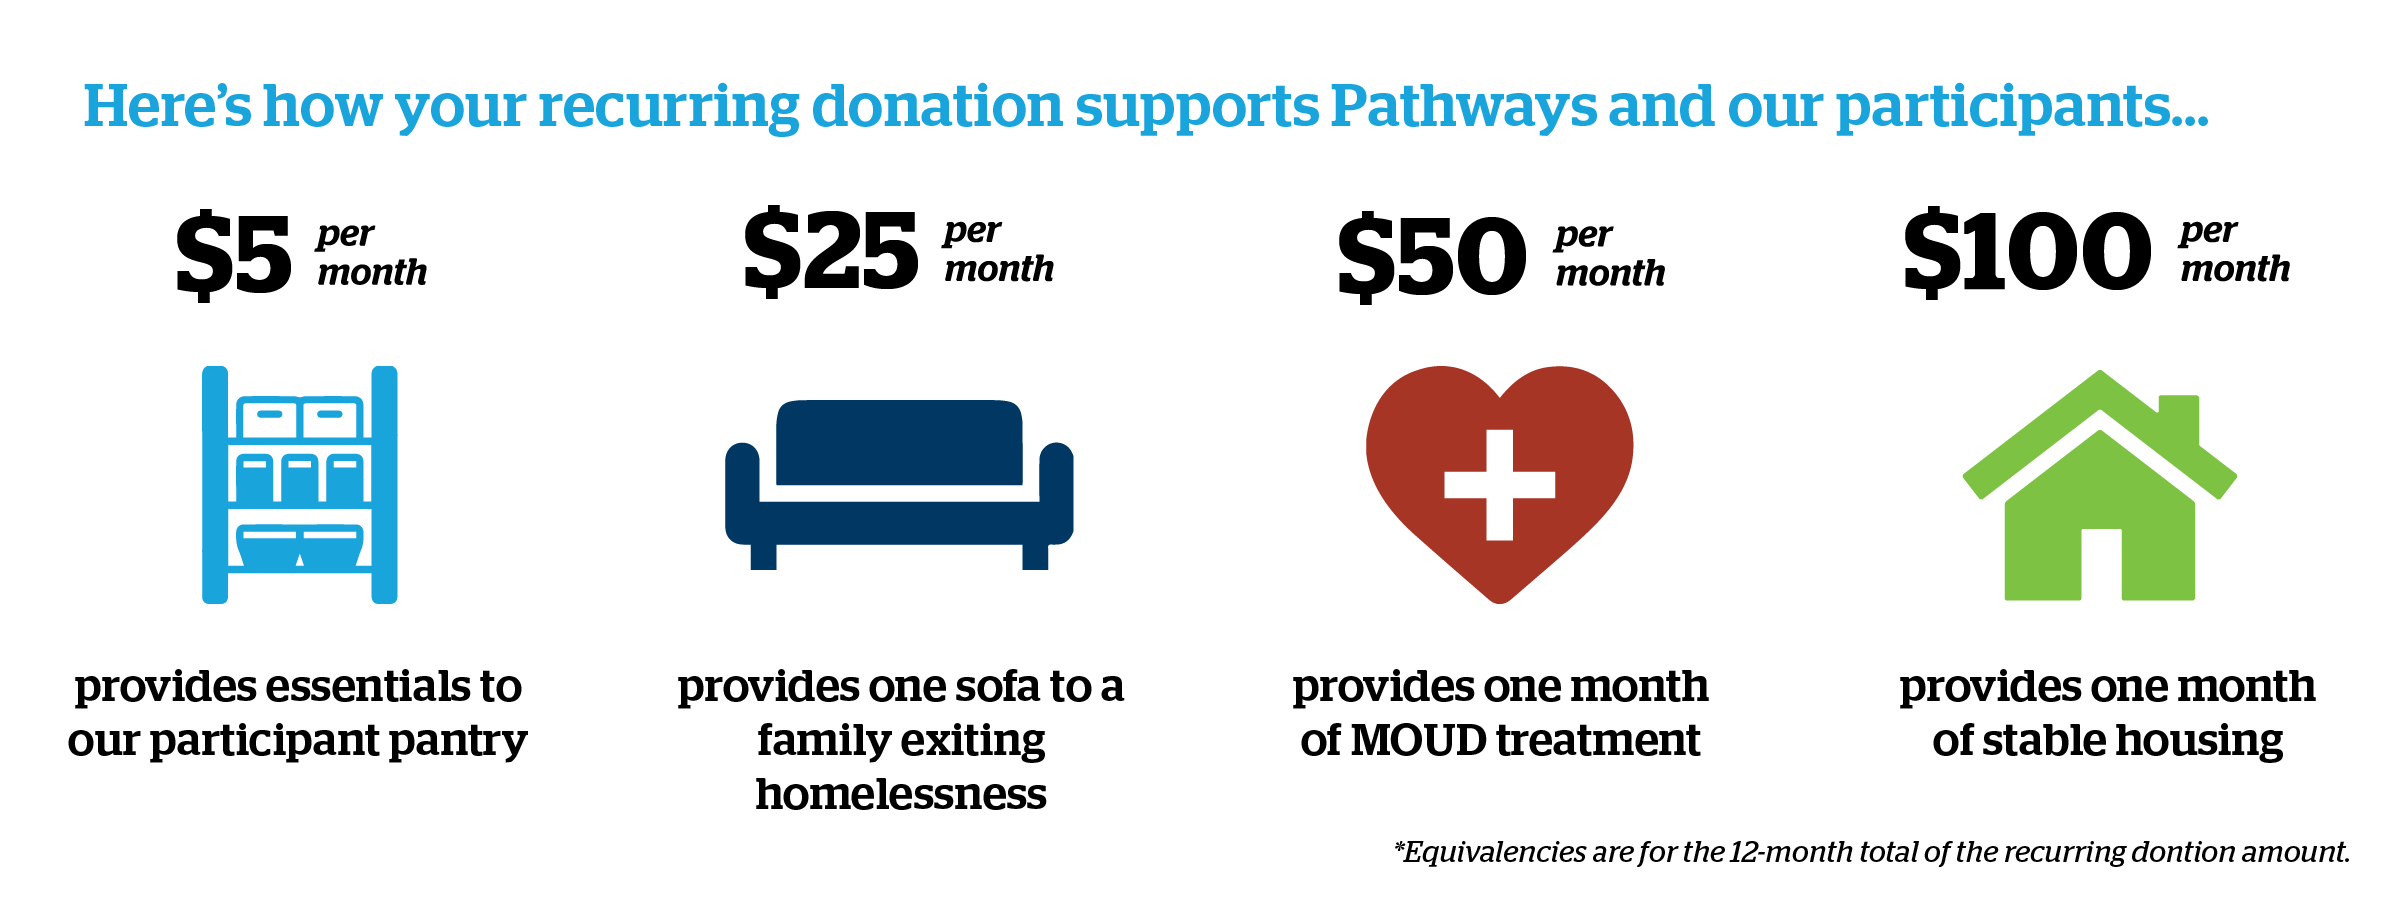 here's how your recurring donation supports pathways and our participants